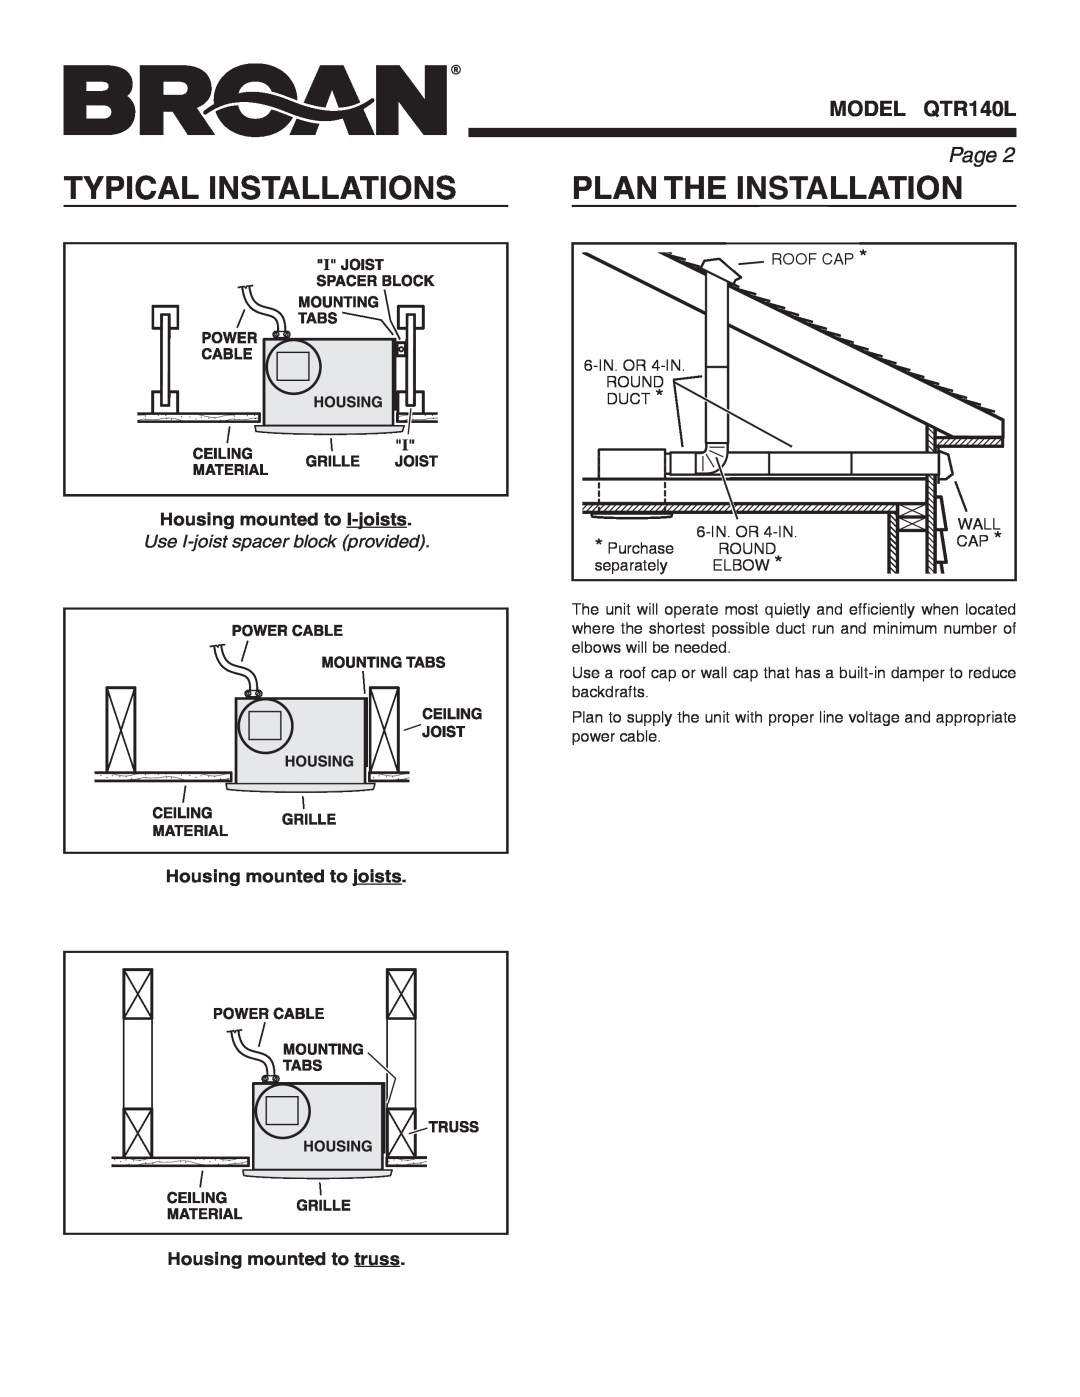 Broan QTR140L Typical Installations, Plan The Installation, Page , Housing mounted to I-joists, Housing mounted to joists 